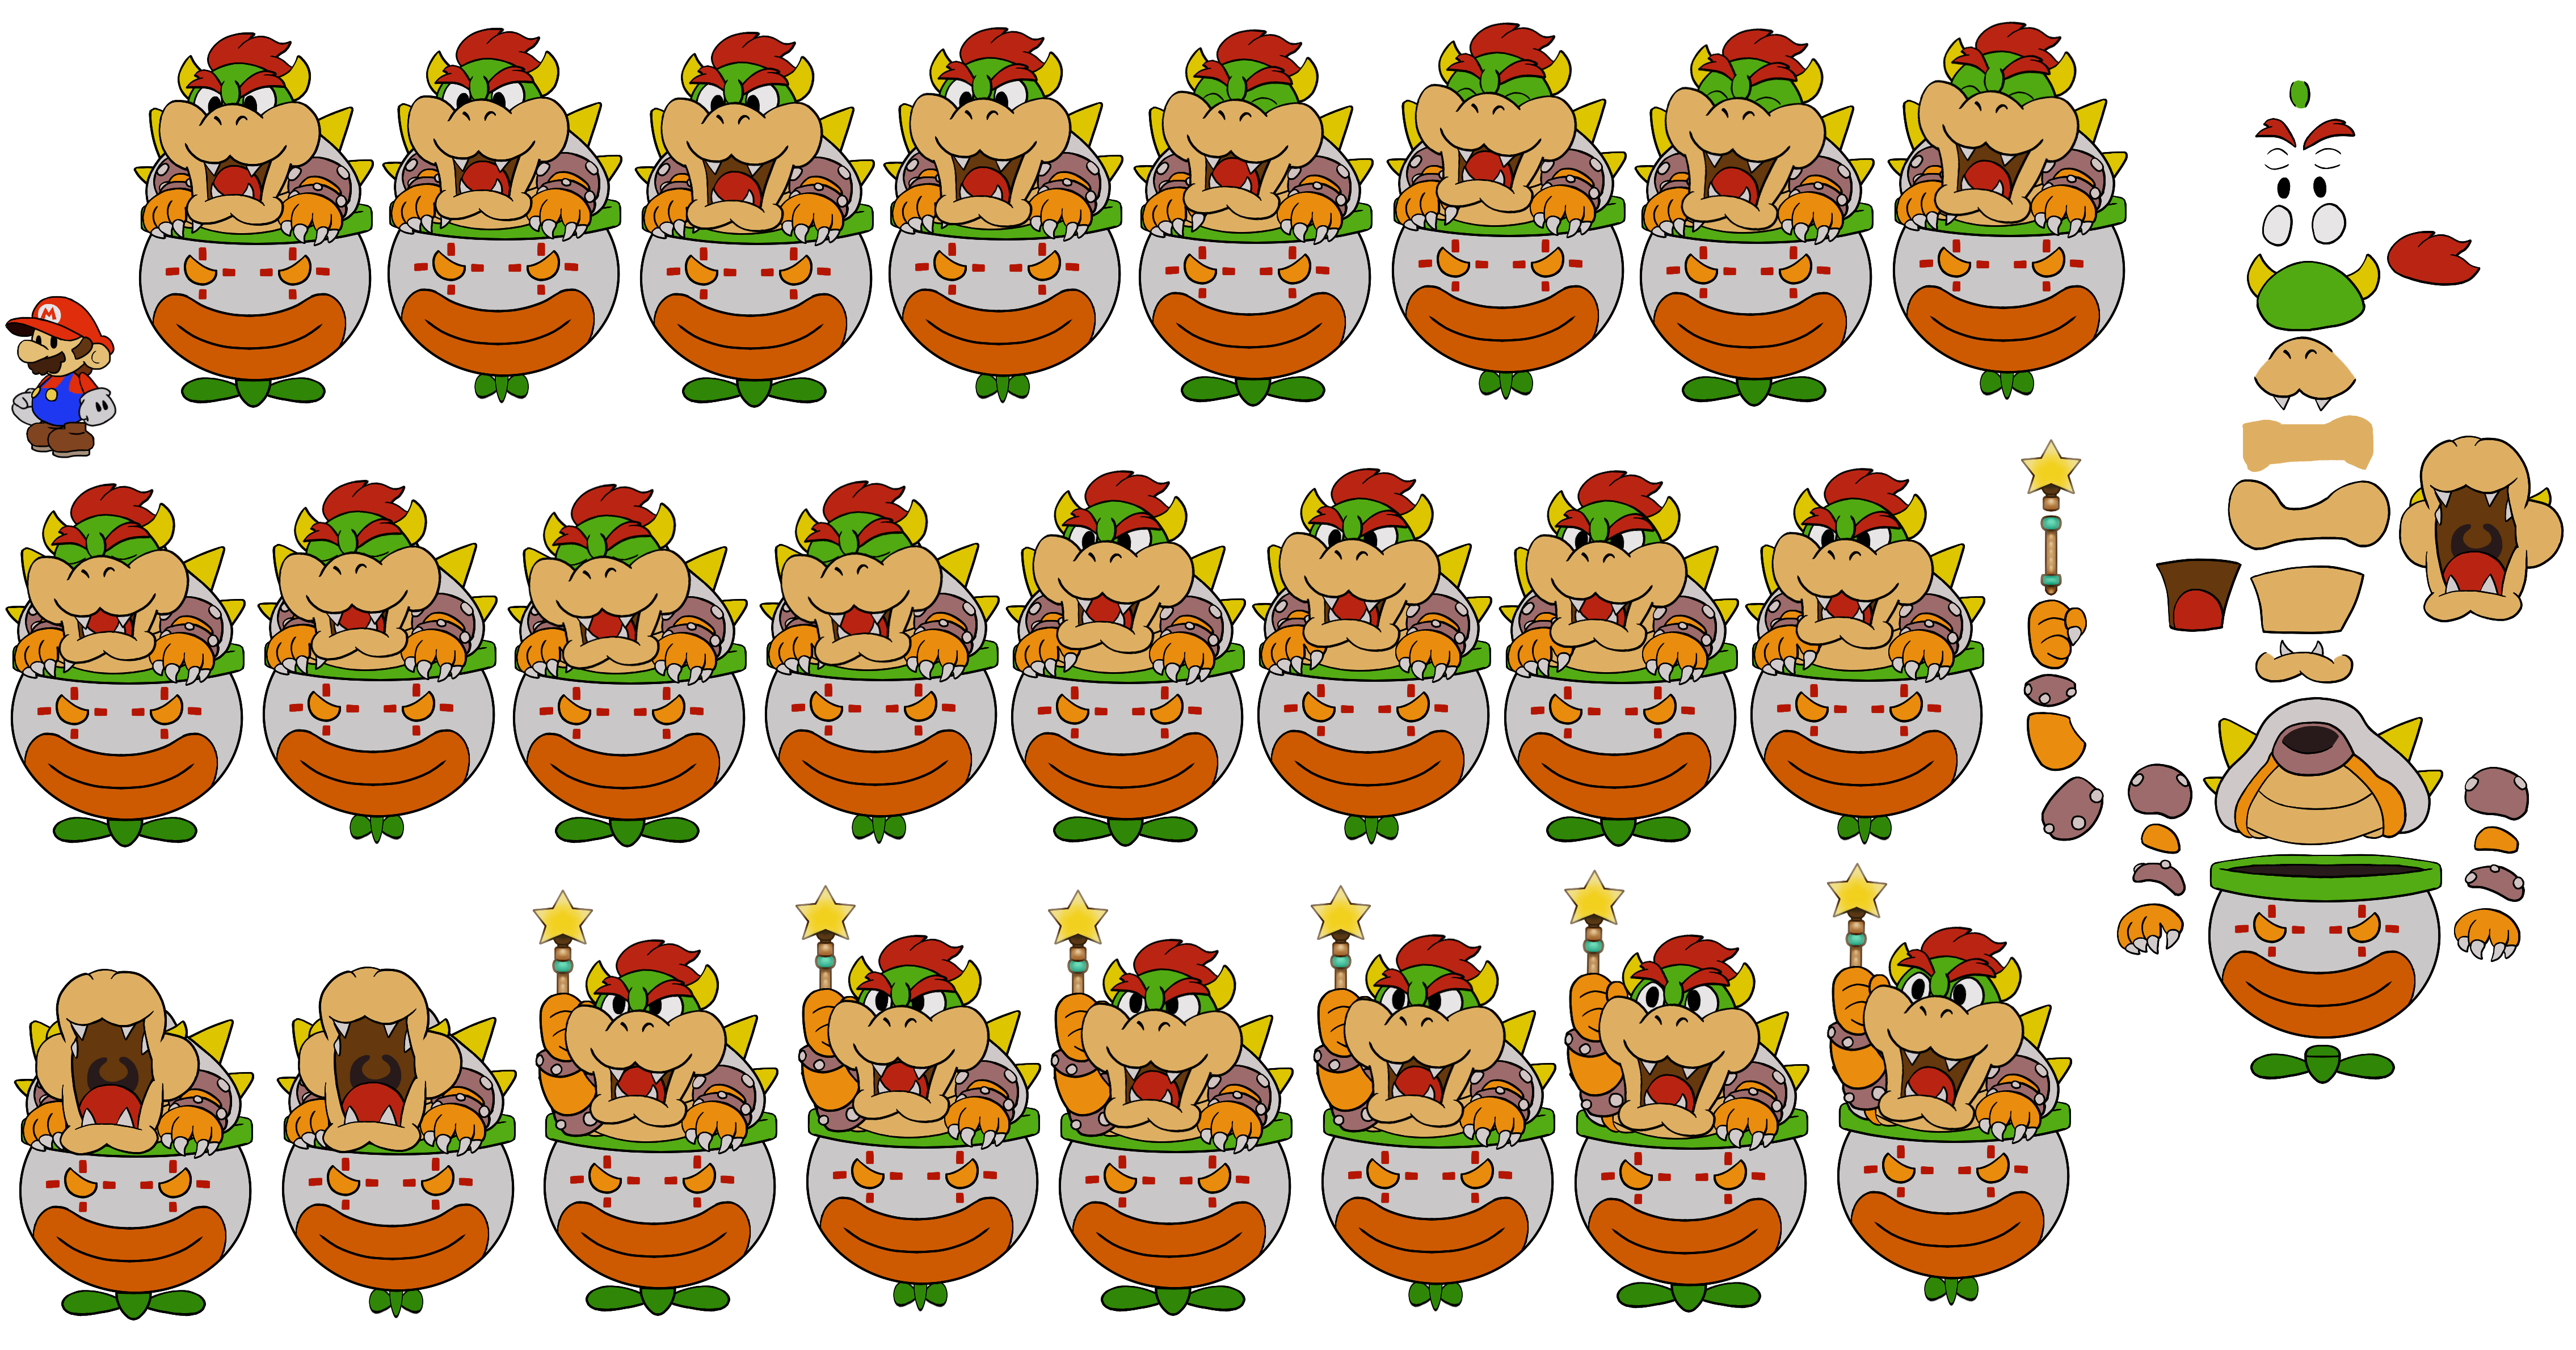 Bowser and Clown Car (Paper Mario 64) (Paper Mario-Style)